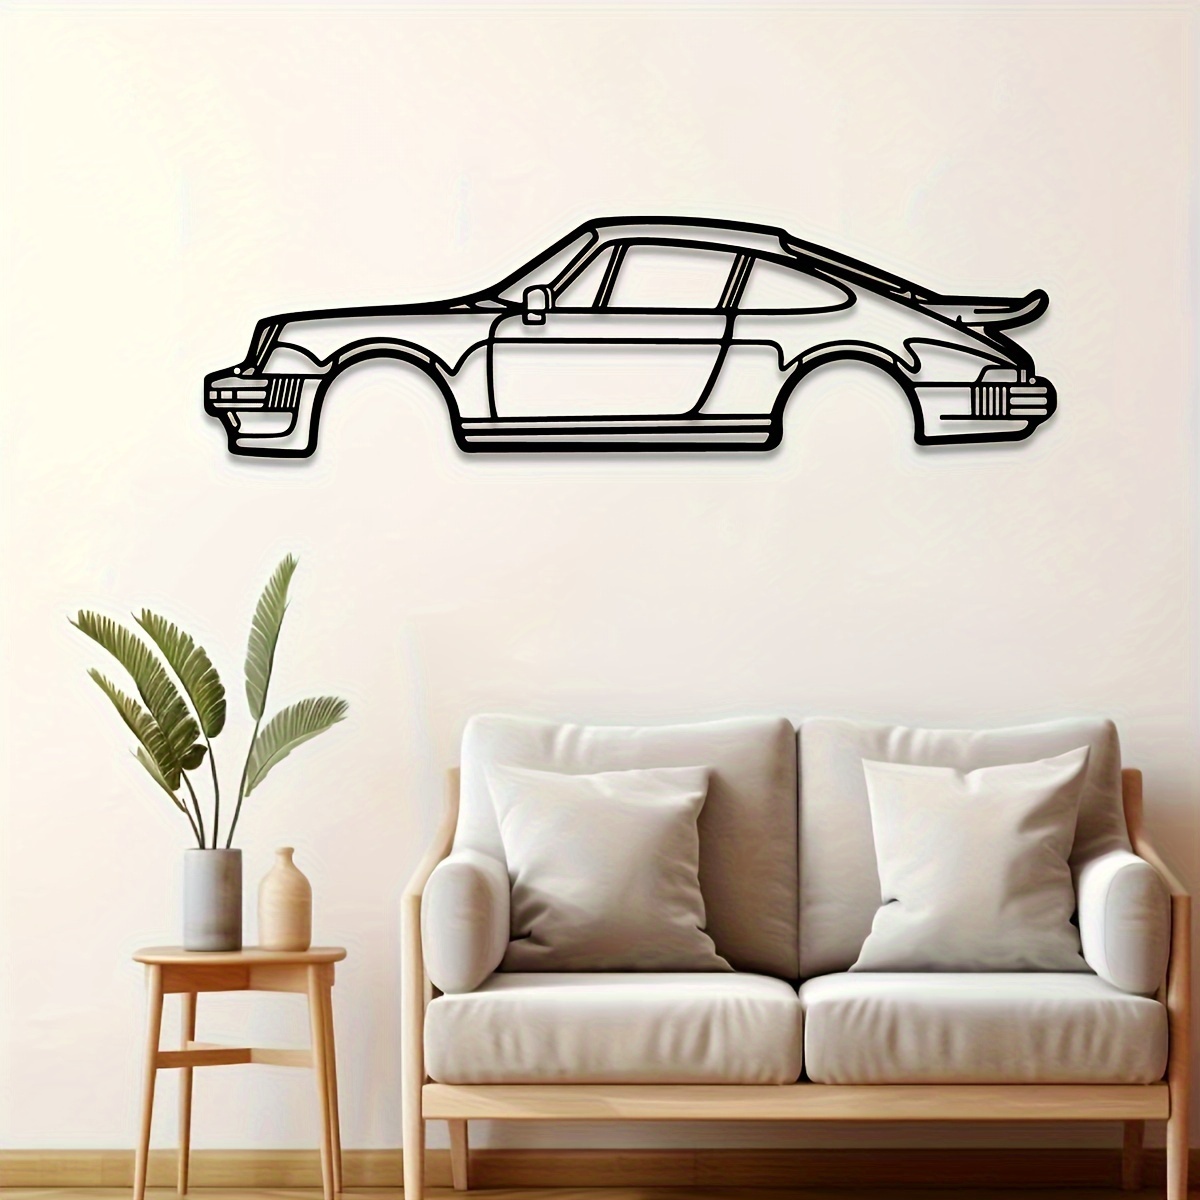 

1pc Laser-cut Simplistic Line Art, Metal Iron Craft, Sports Car Silhouette Wall Art, Home Decor, Indoor & Outdoor Metal Wall Hanging Craft For Living Room Bedroom Garage Decor